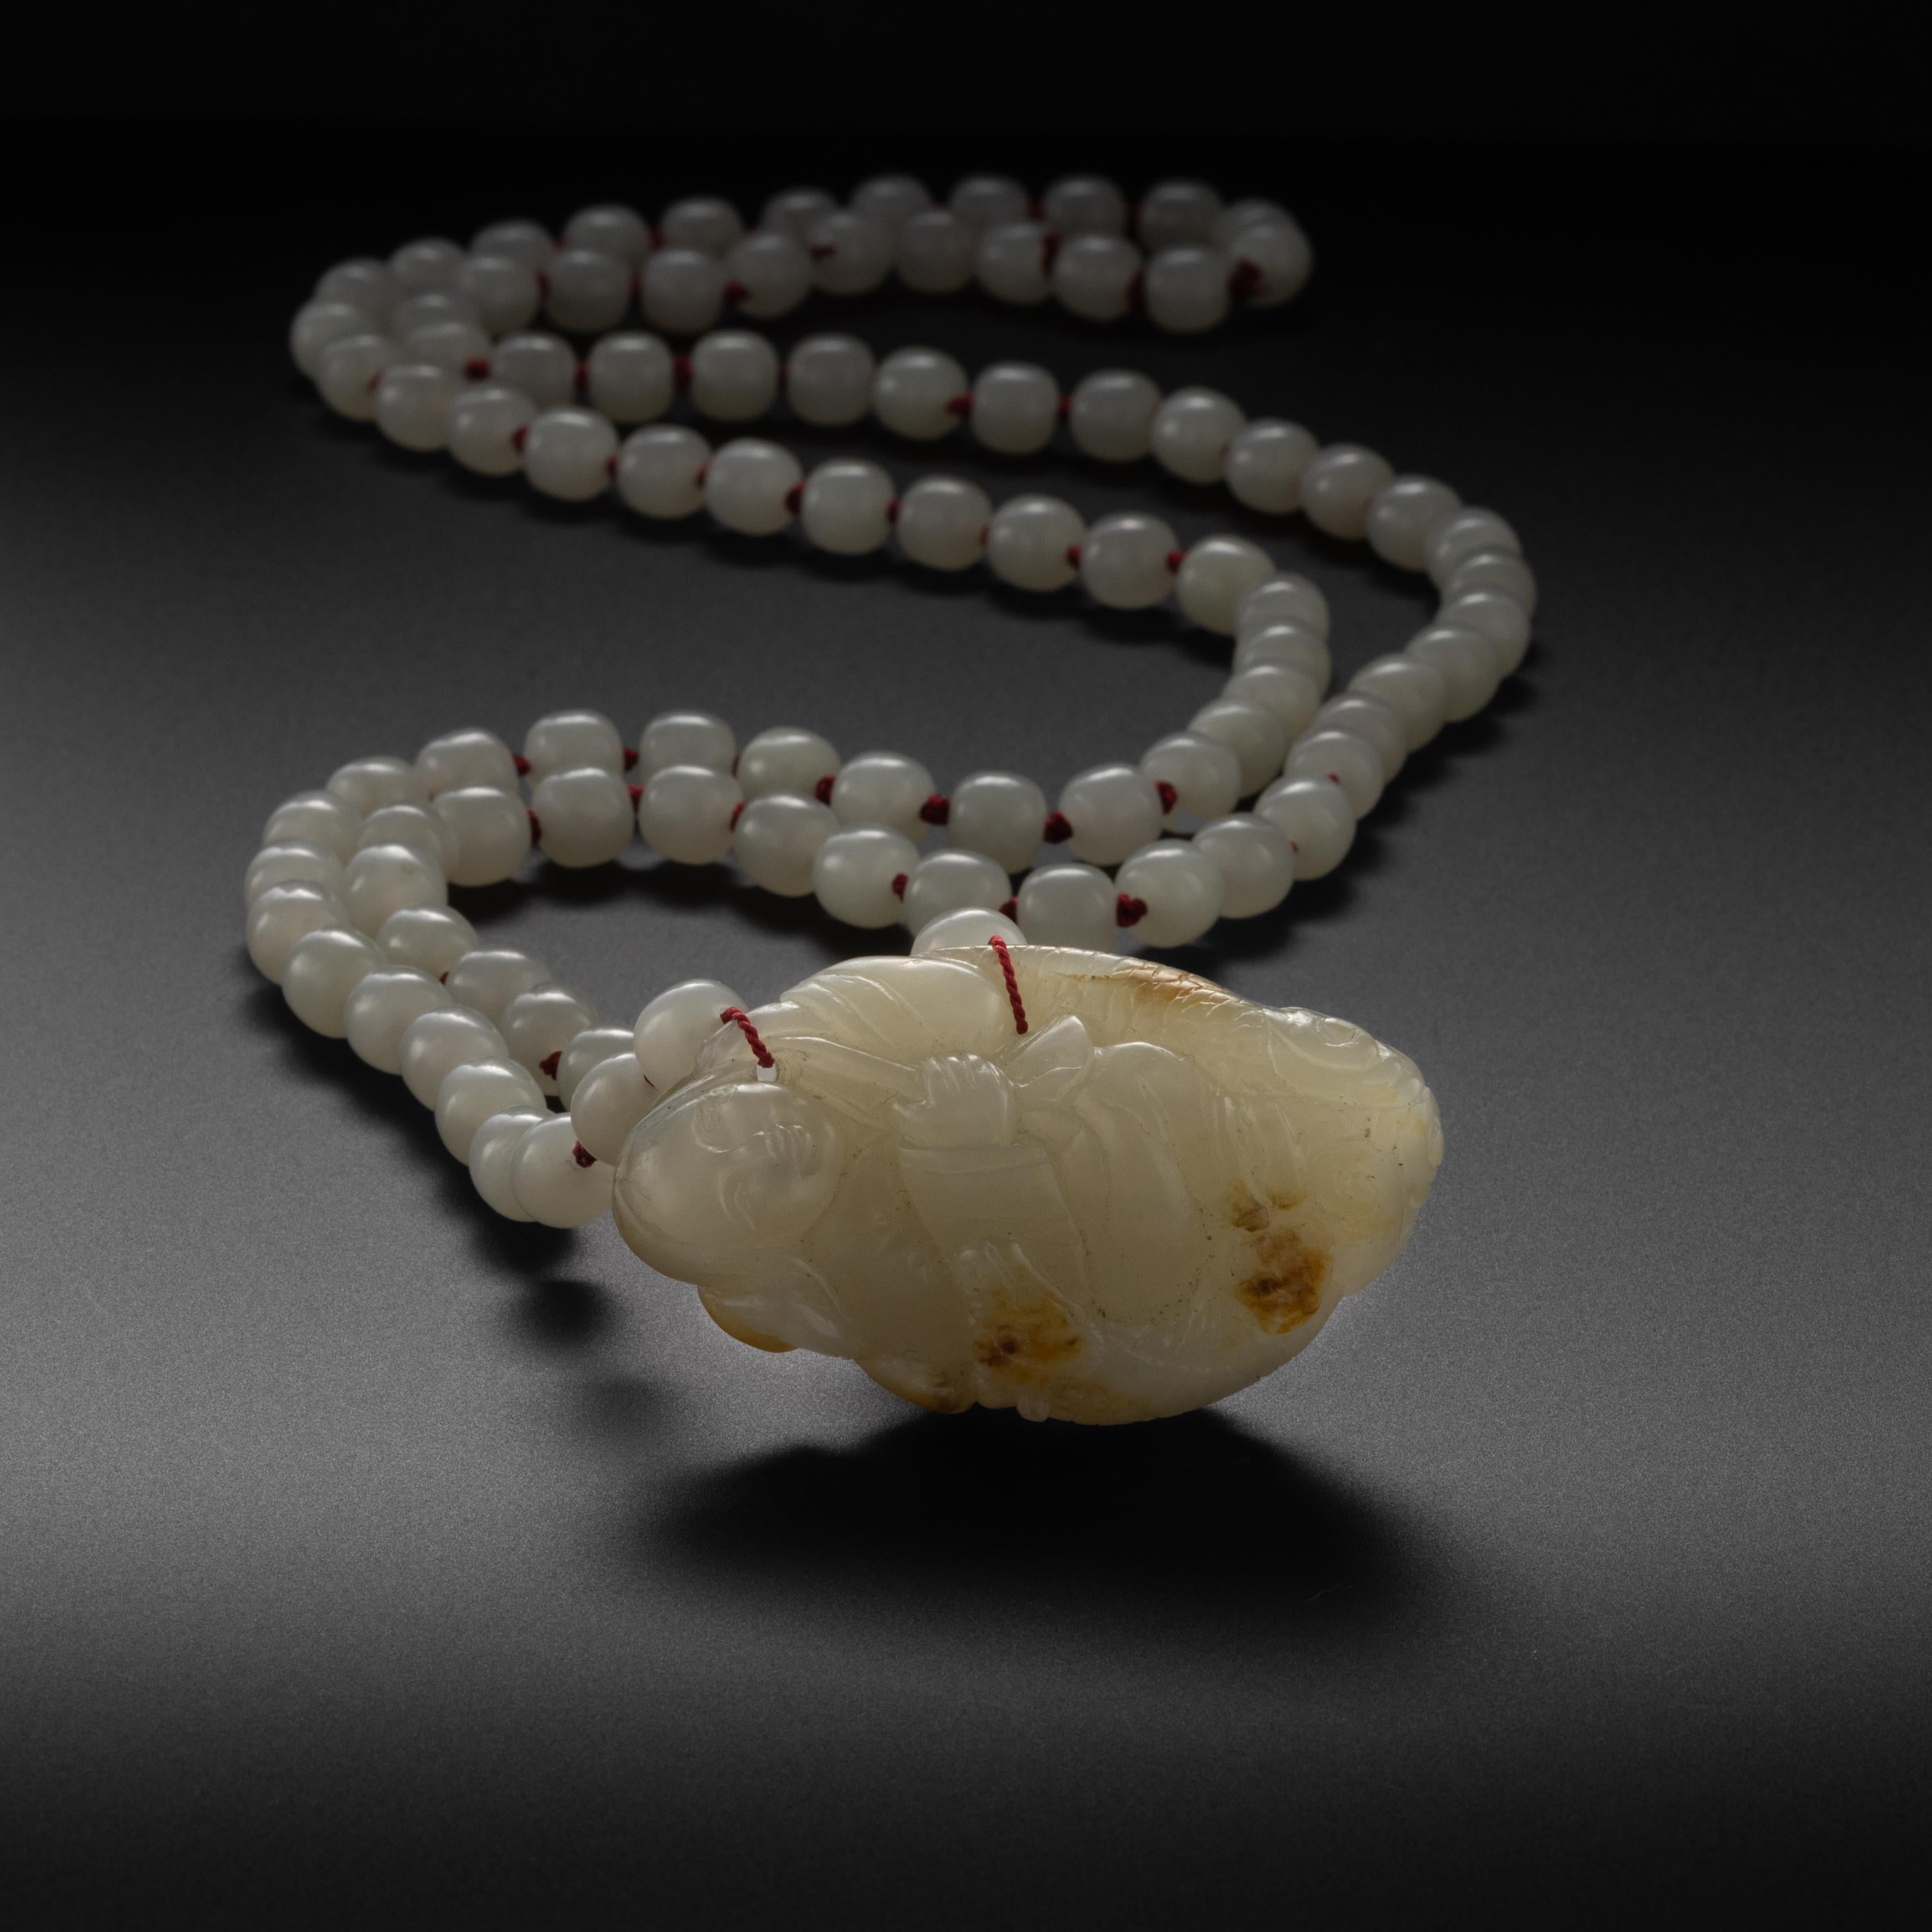 A superlative and genuine 19th-century white nephrite pebble hand-carved into a miraculously detailed Buddha figure has been paired with natural and untreated (contemporary) white nephrite jade beads that are an excellent color-match for the